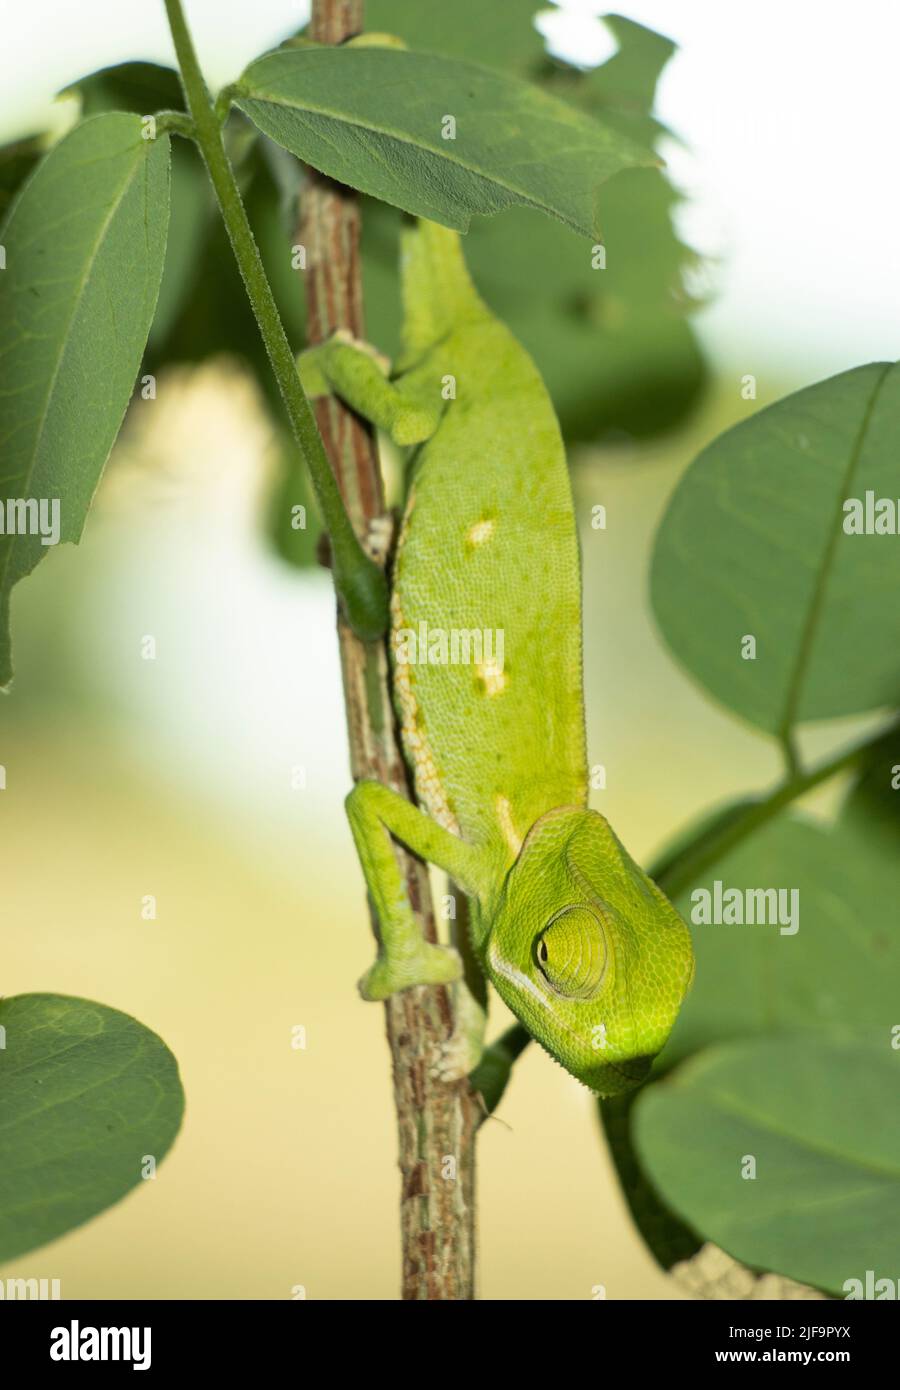 A study in camouflage, a young Flap-necked Chameleon takes on the colours of the surrounding vegetation to avoid detection by sharp eyed predators Stock Photo